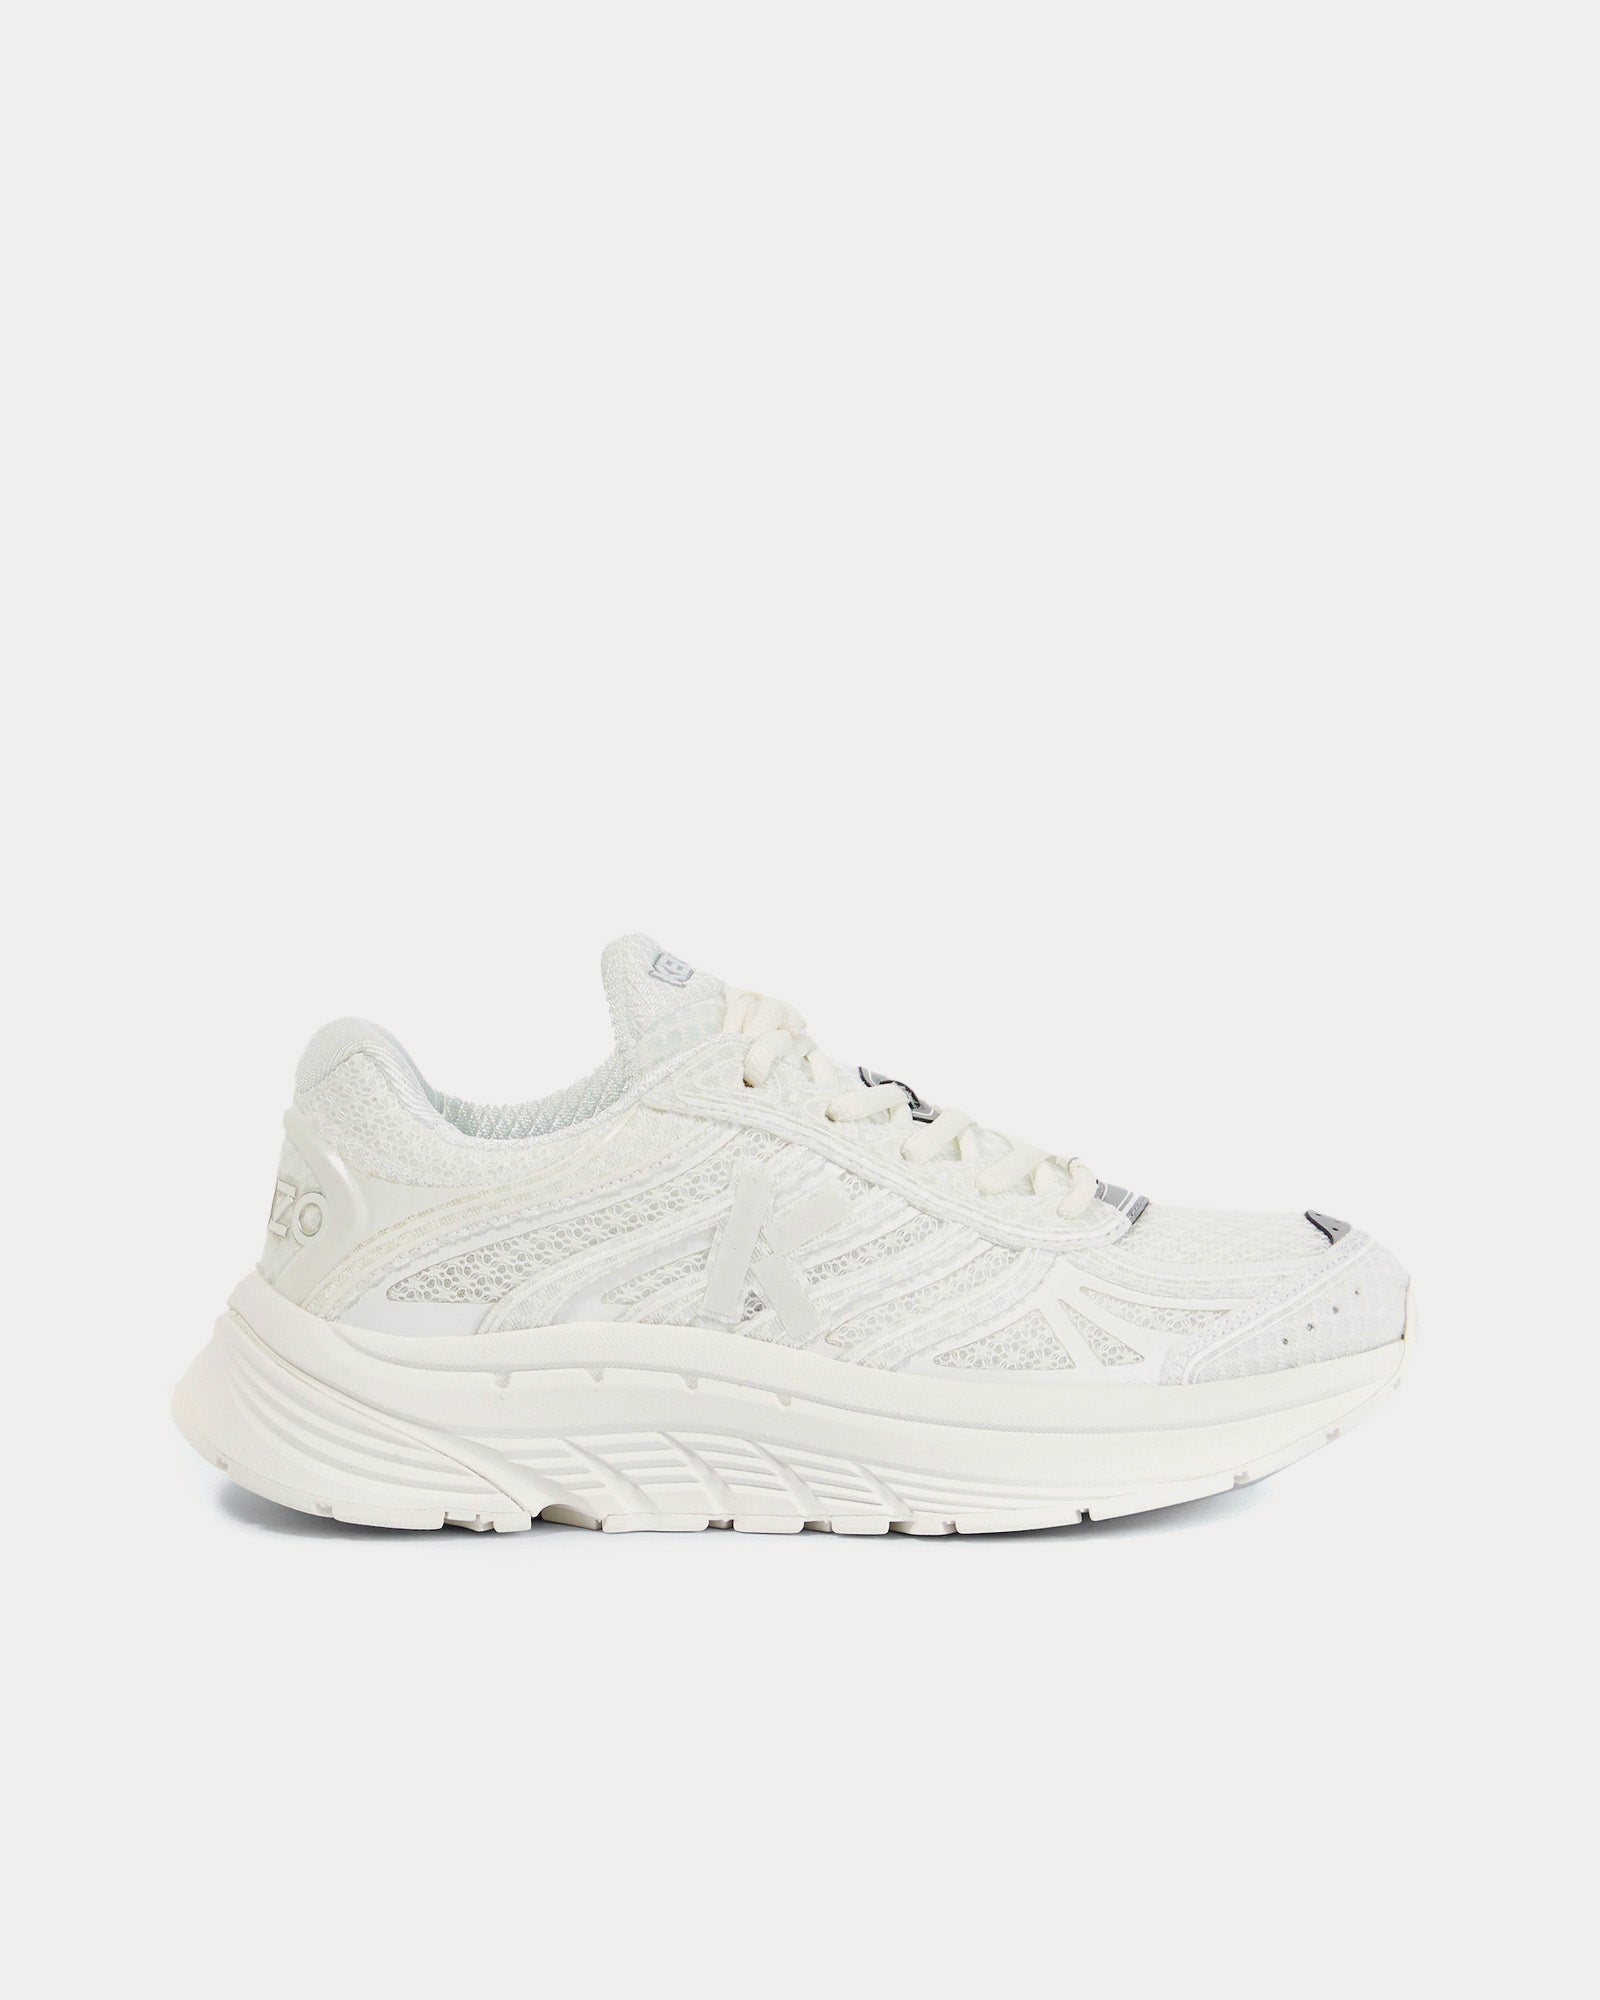 Kenzo - Pace Tech Runner White Low Top Sneakers